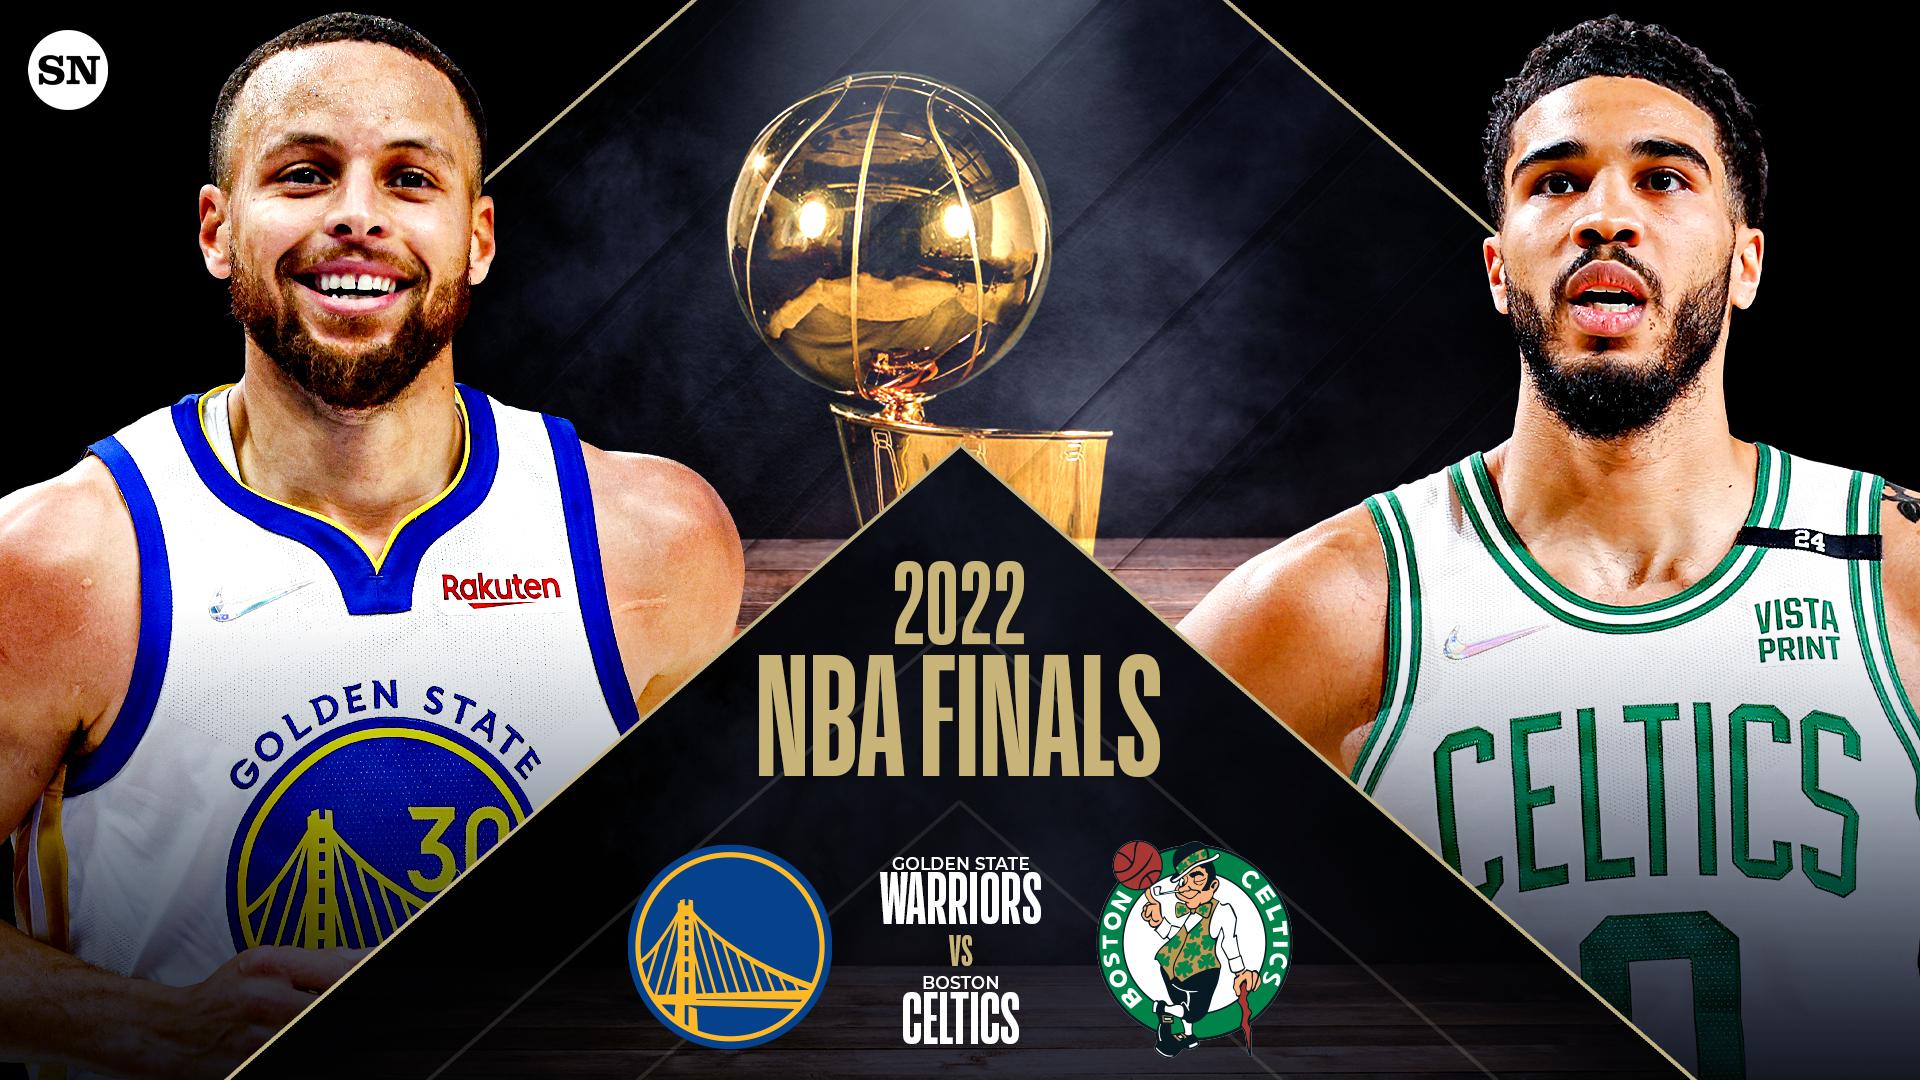 NBA Finals schedule 2022: Full dates, times, TV channels & live streams to watch Celtics vs. Warriors